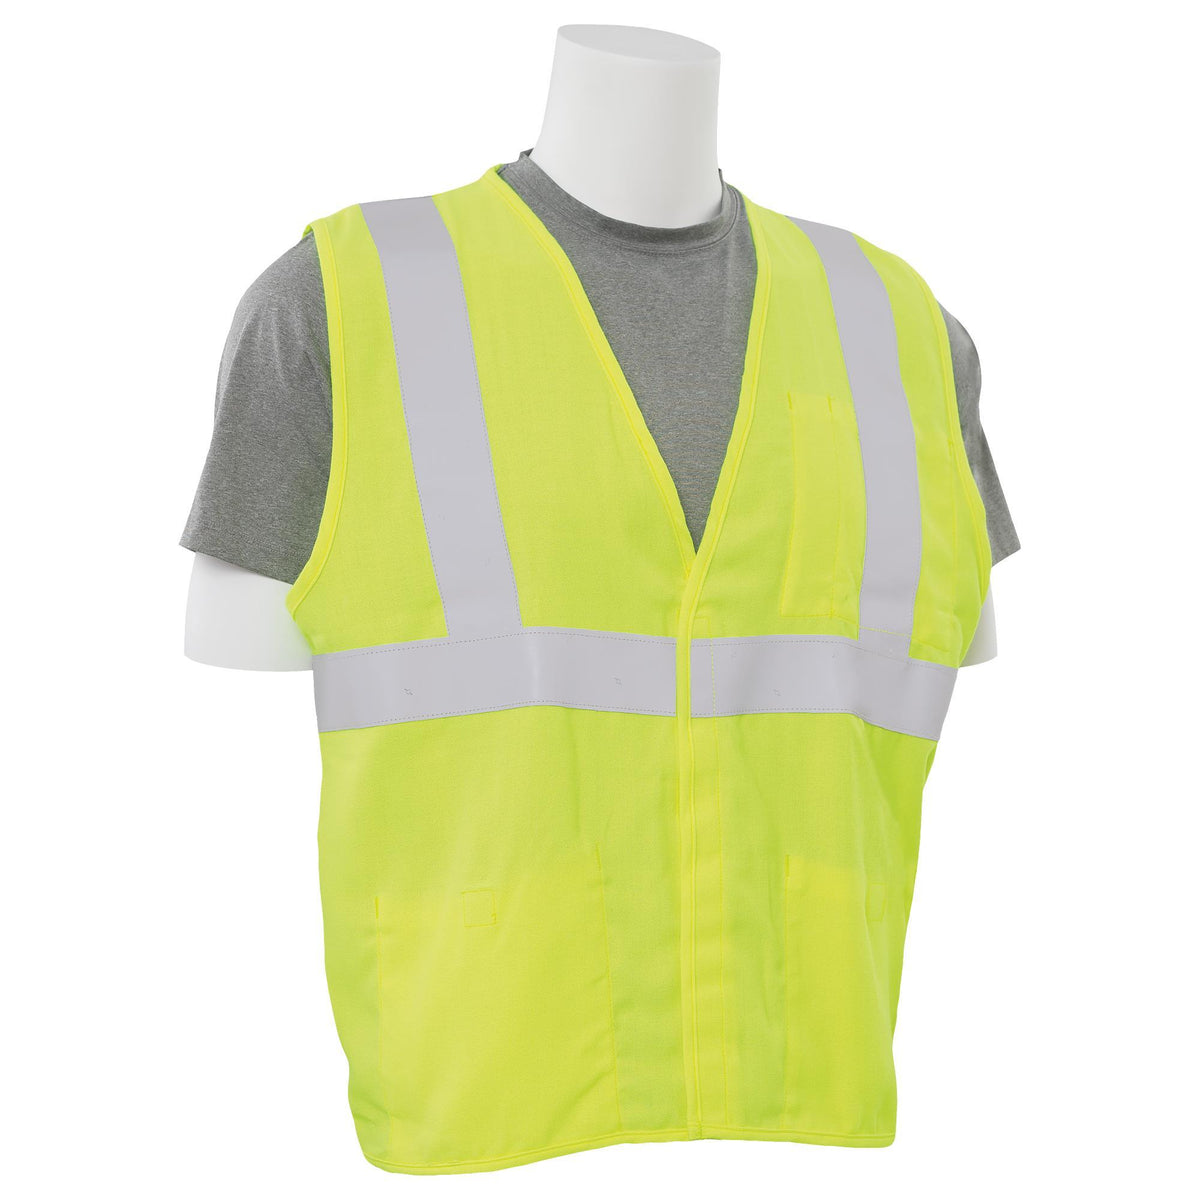 IFR150 Class 2 Inherently Flame Resistant Safety Vest 1PC